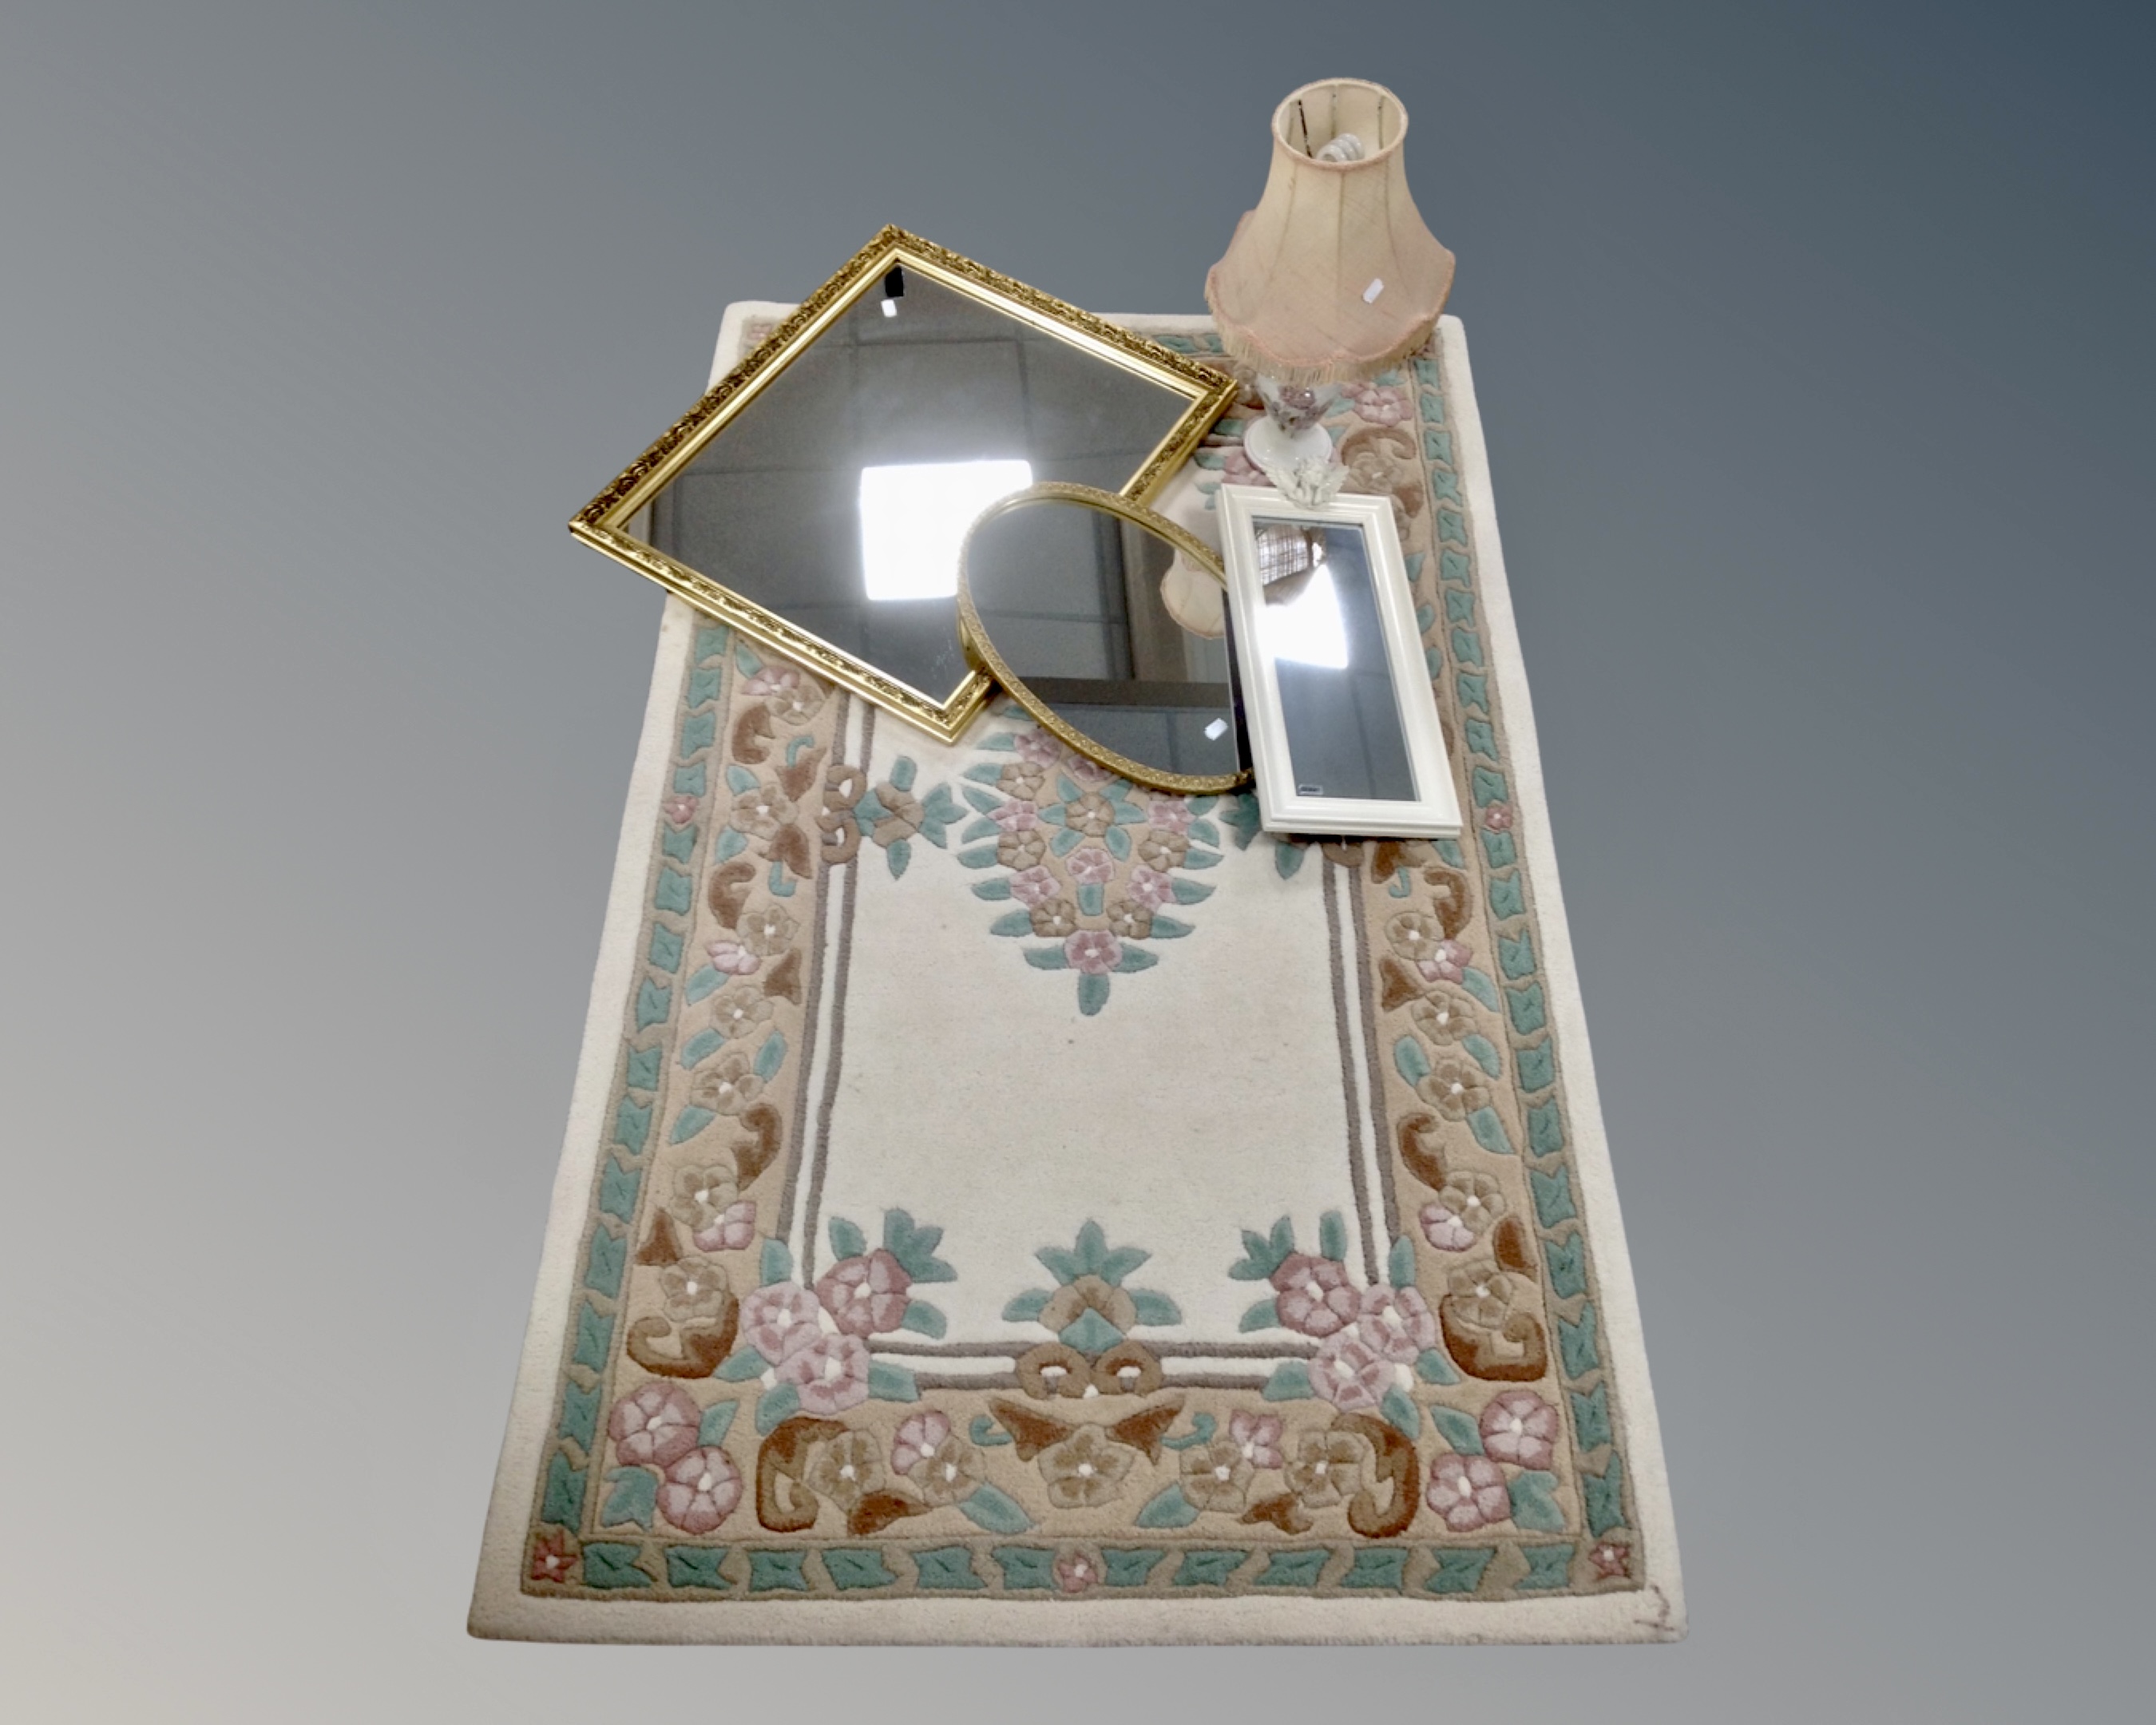 A floral embossed rug on cream ground together with a ceramic table lamp with shade and three